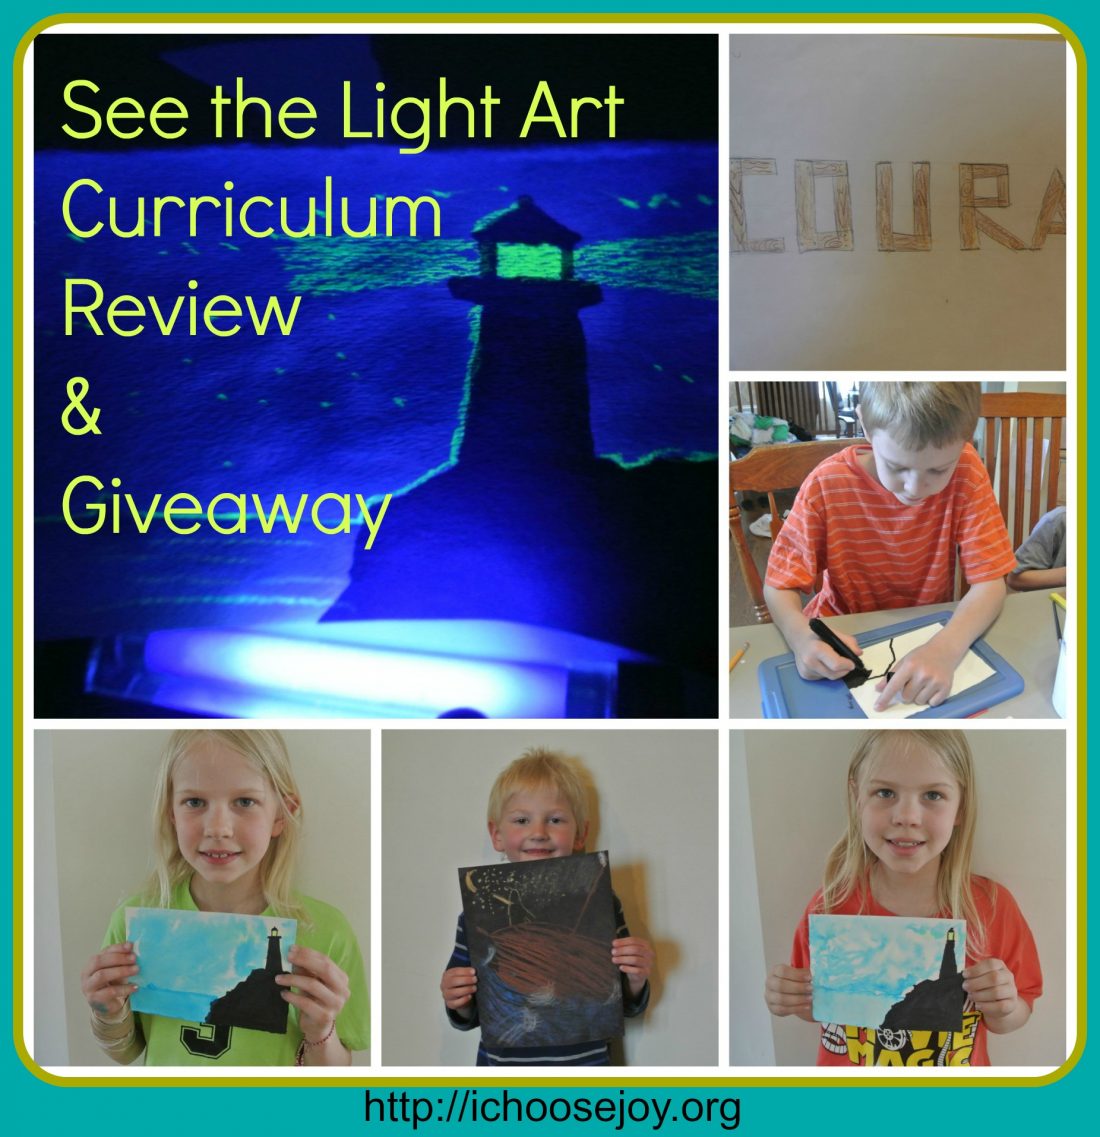 Review/Giveaway of See the Light “Shipwrecked” Art DVD